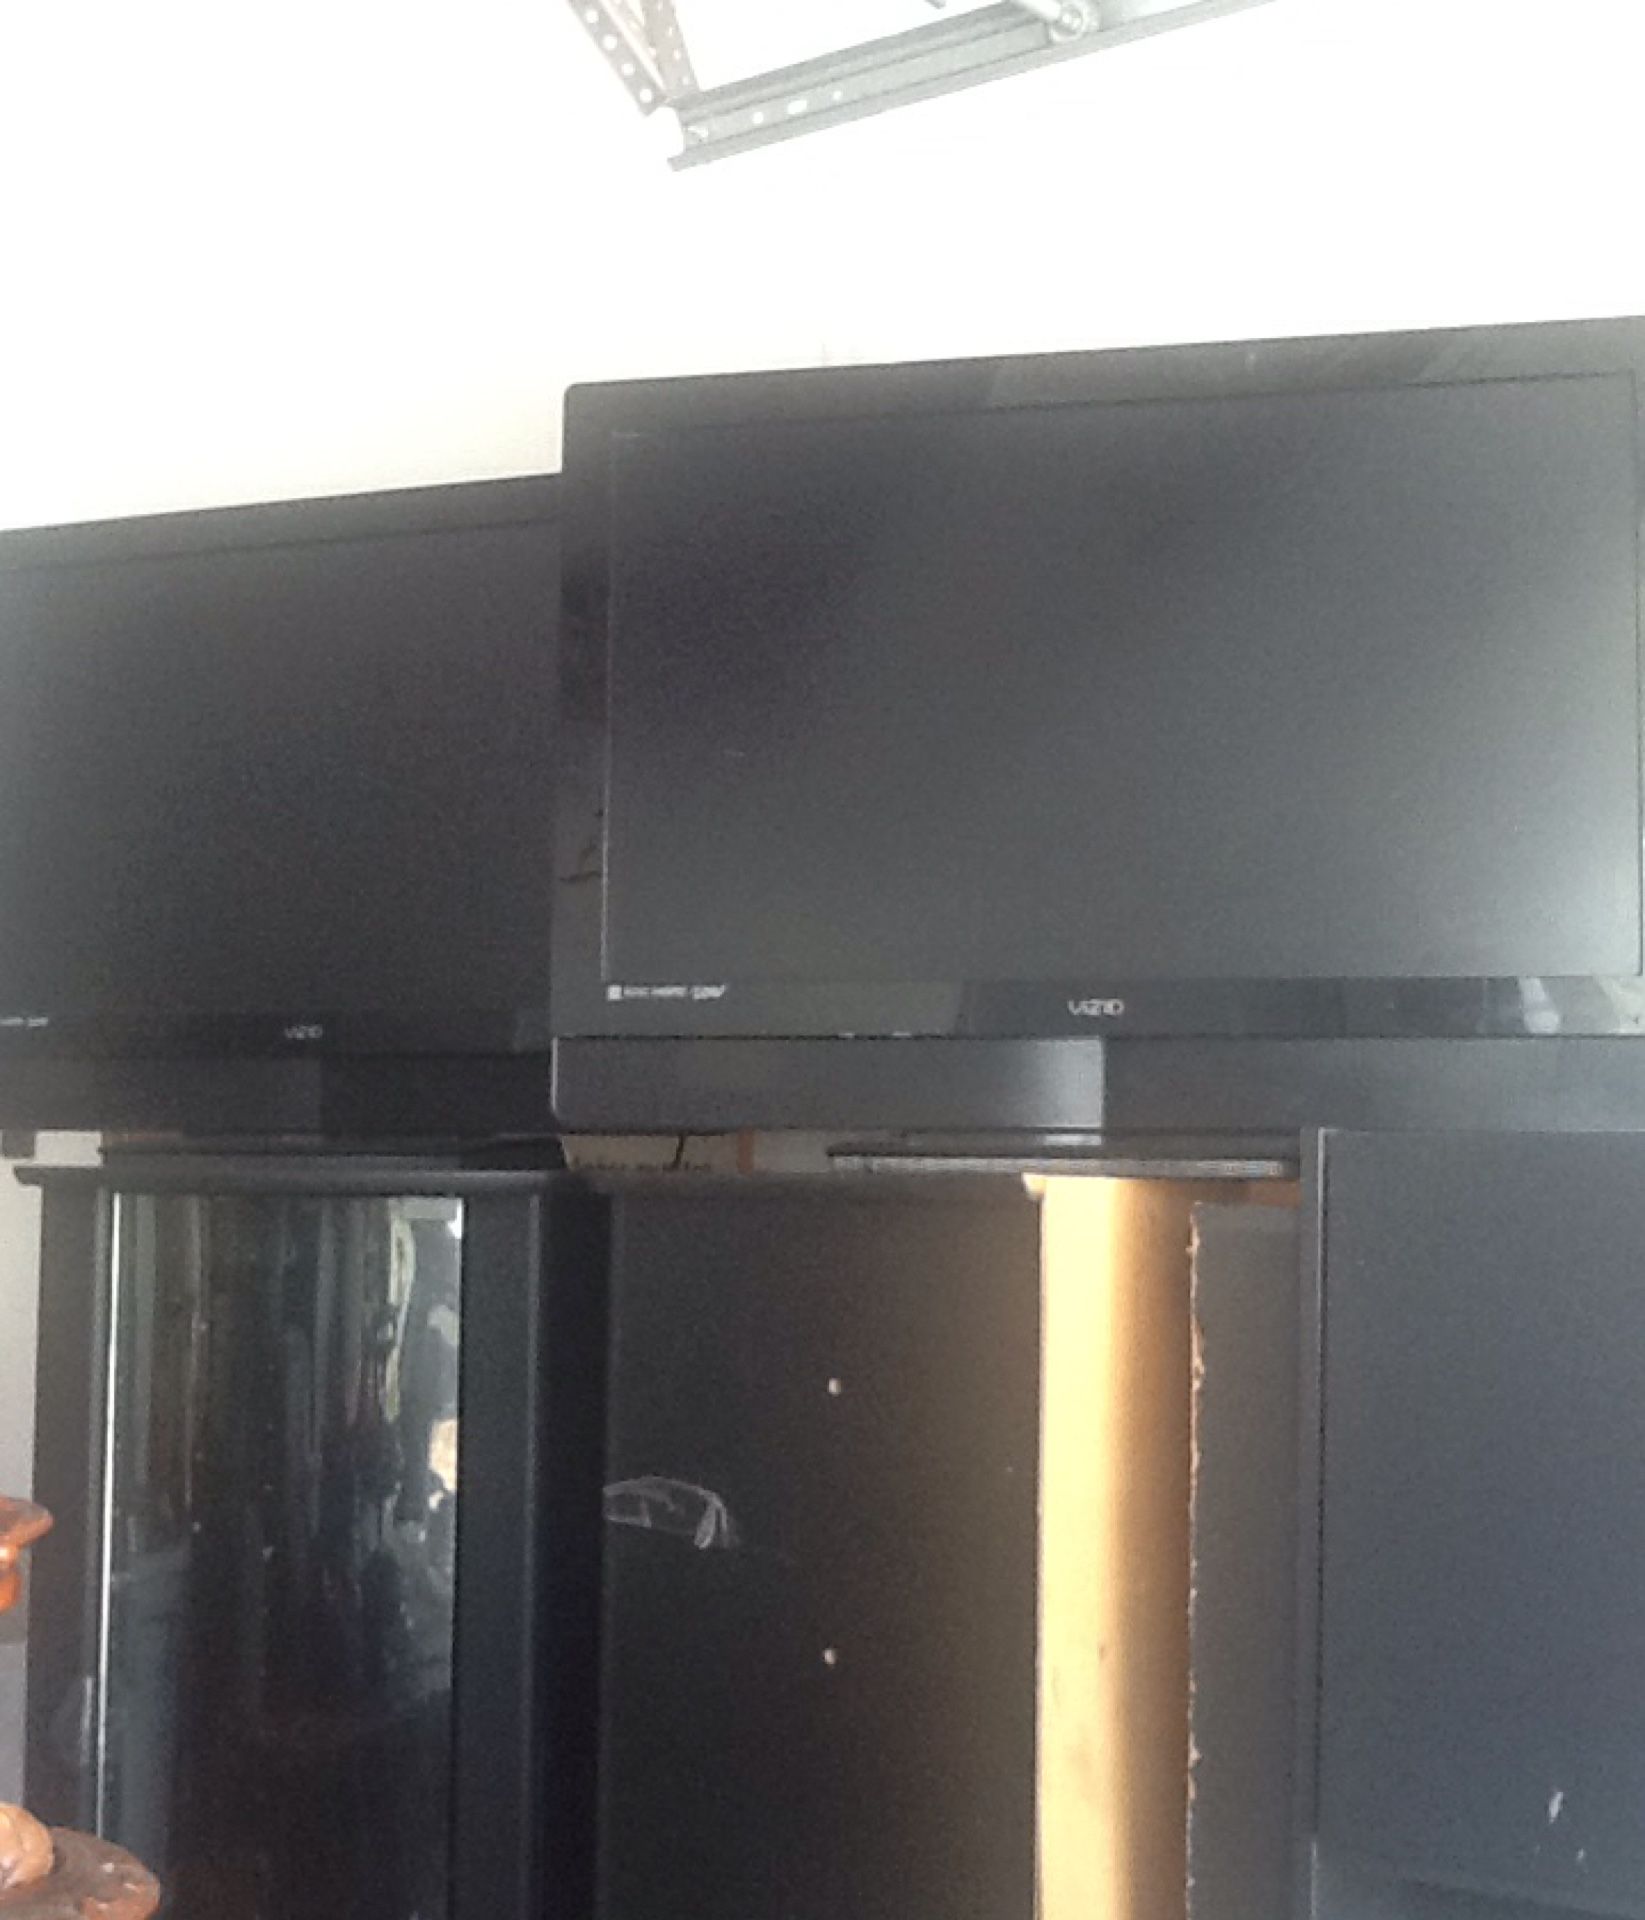 2 Visio 35 inc flat screen tv 150$ for the 2 see my offers for moor info